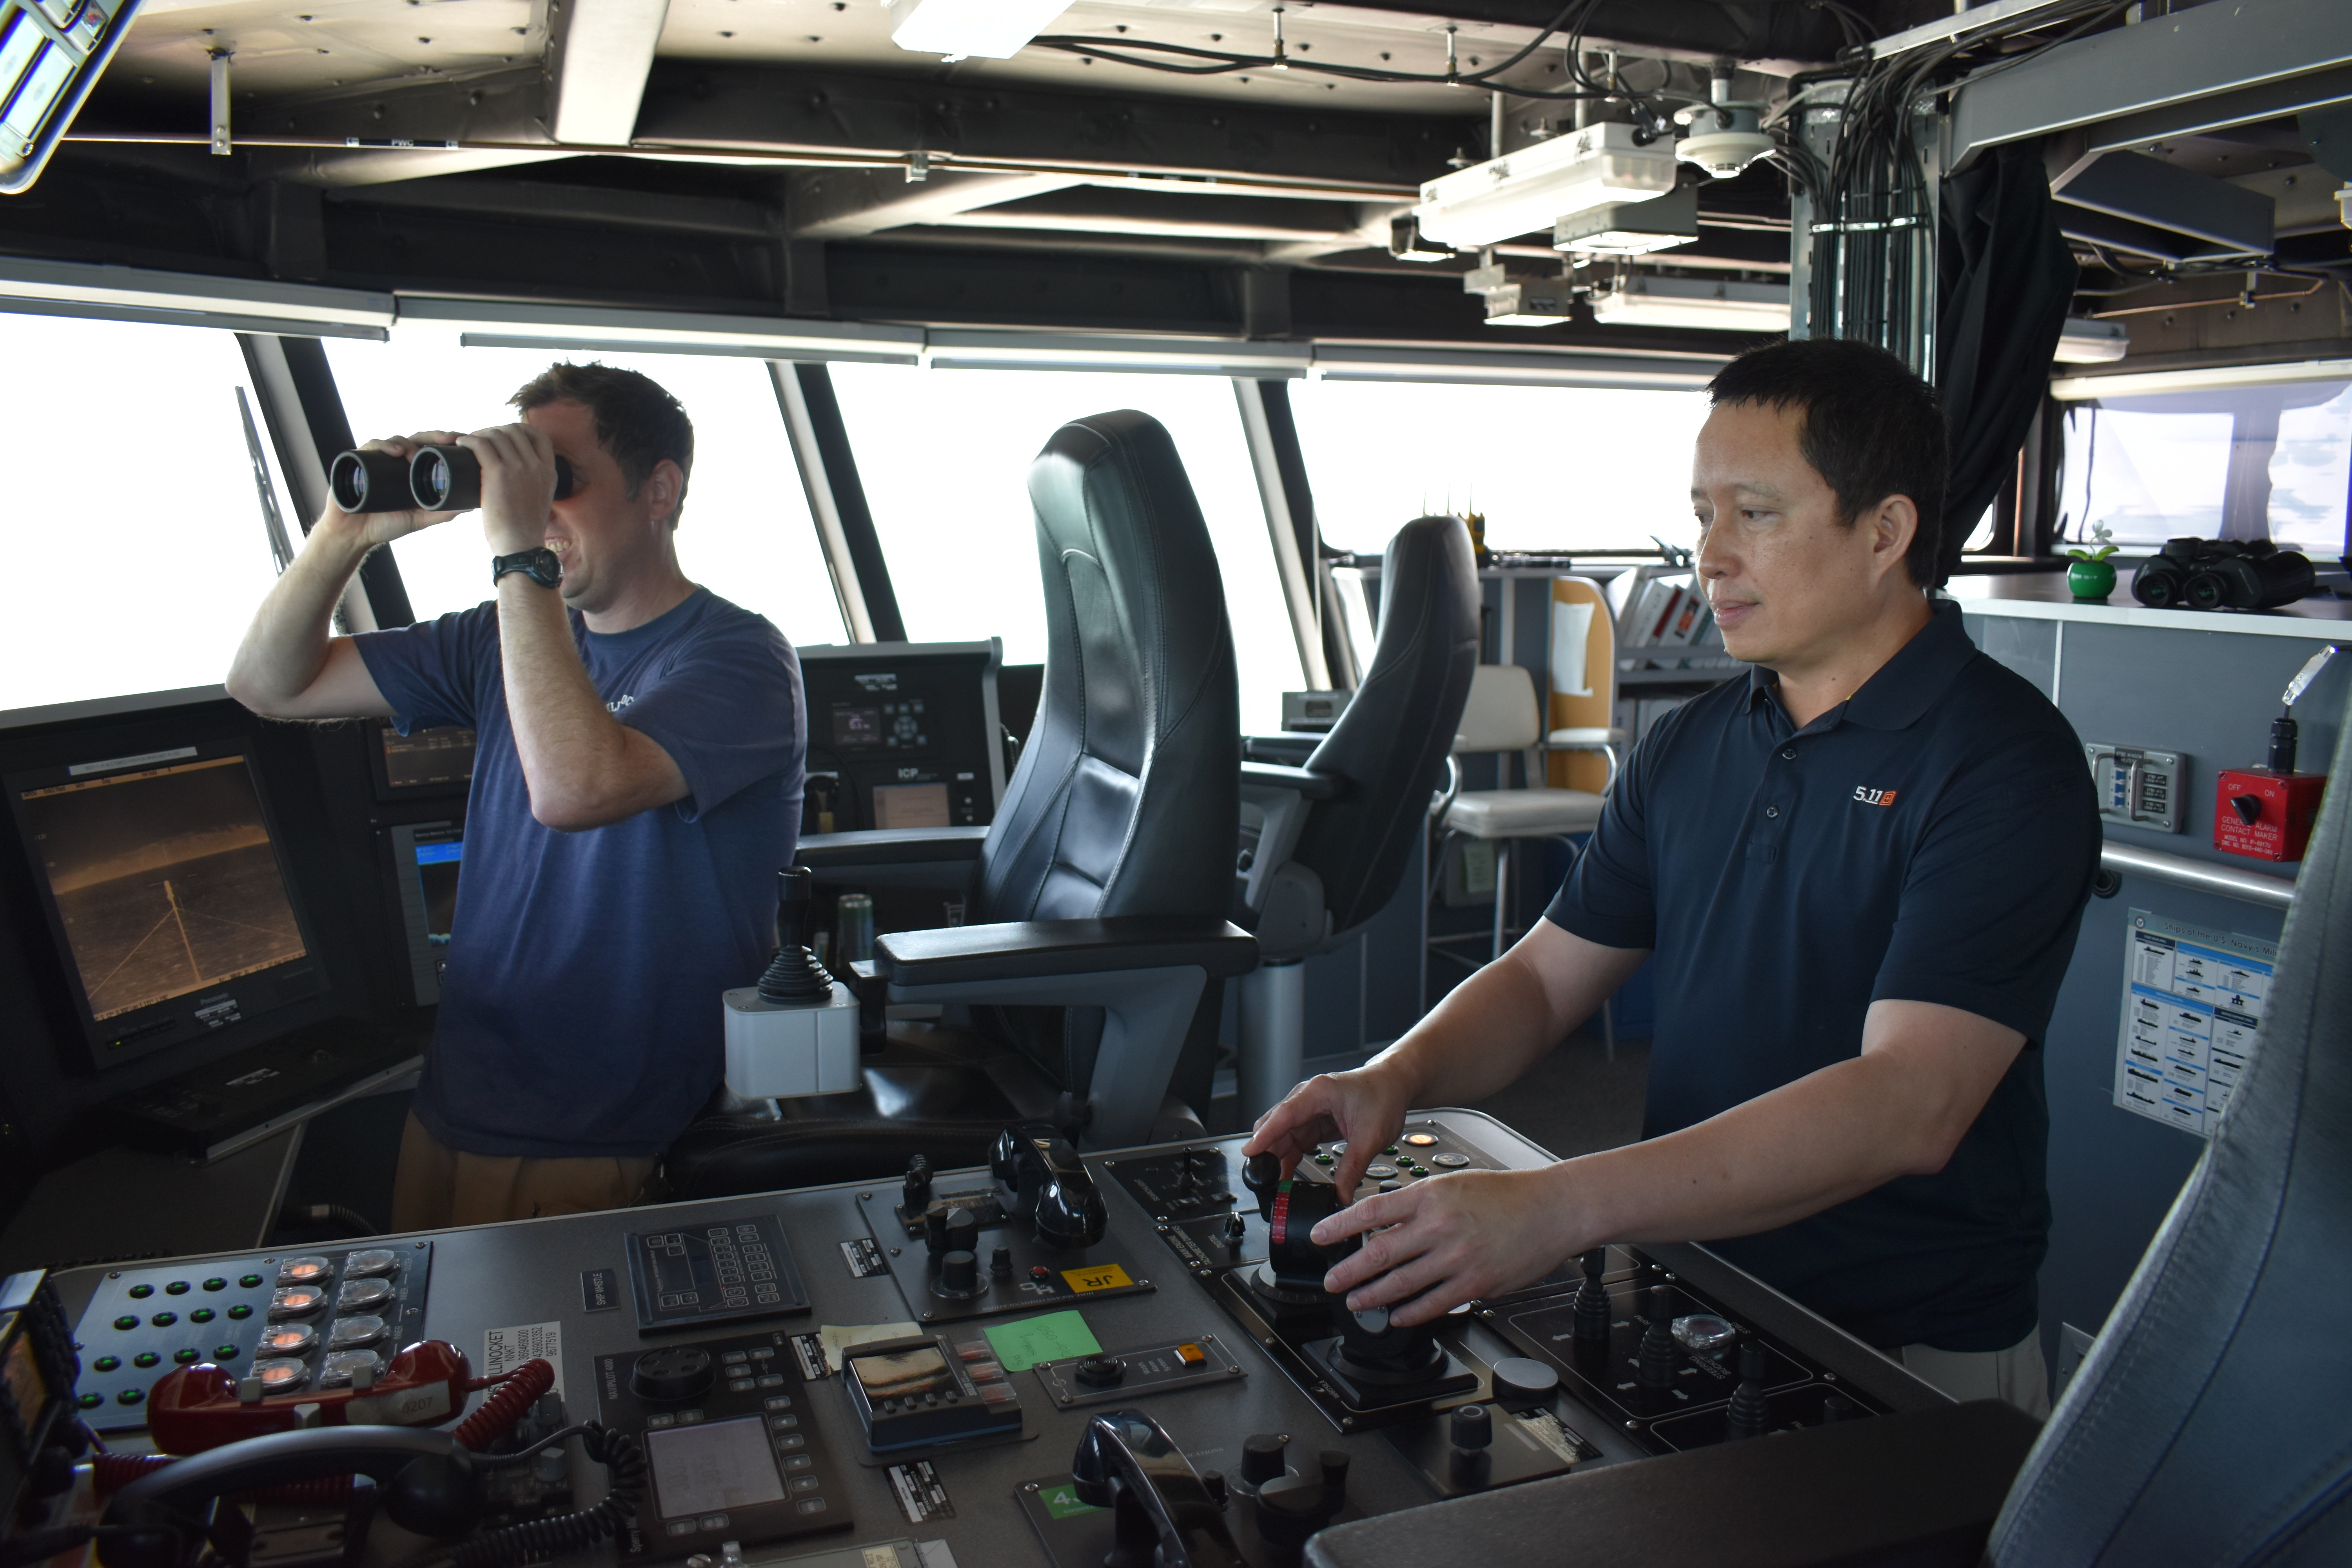 Civilian mariner Capt. Erwin F. Lao, right, USNS Millinocket’s master, maneuvers Military Sealift Command’s expeditionary fast transport USNS Millinocket prior to launching the fast rescue boat, while assisted by Chief Mate Jeffrey A. Motl while rendering assistance to a small craft in distress in the vicinity of Darwin, Australia, August 8.